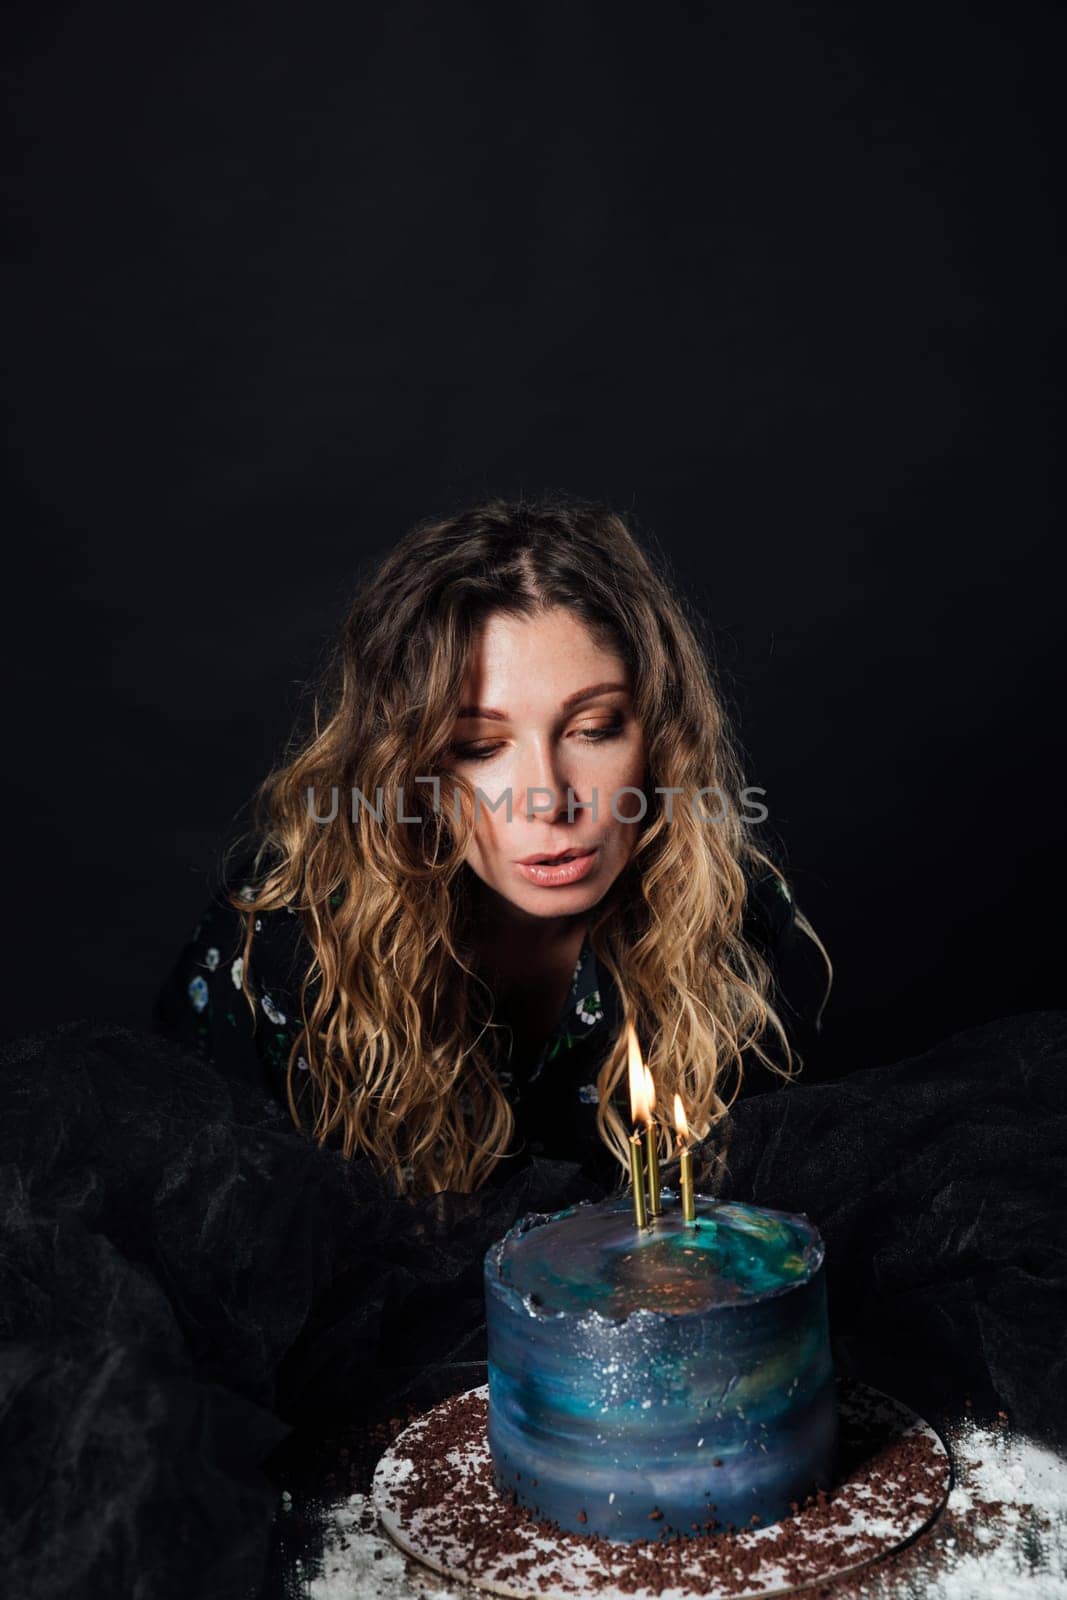 birthday woman blows candles on cake dessert delicious sweets by Simakov